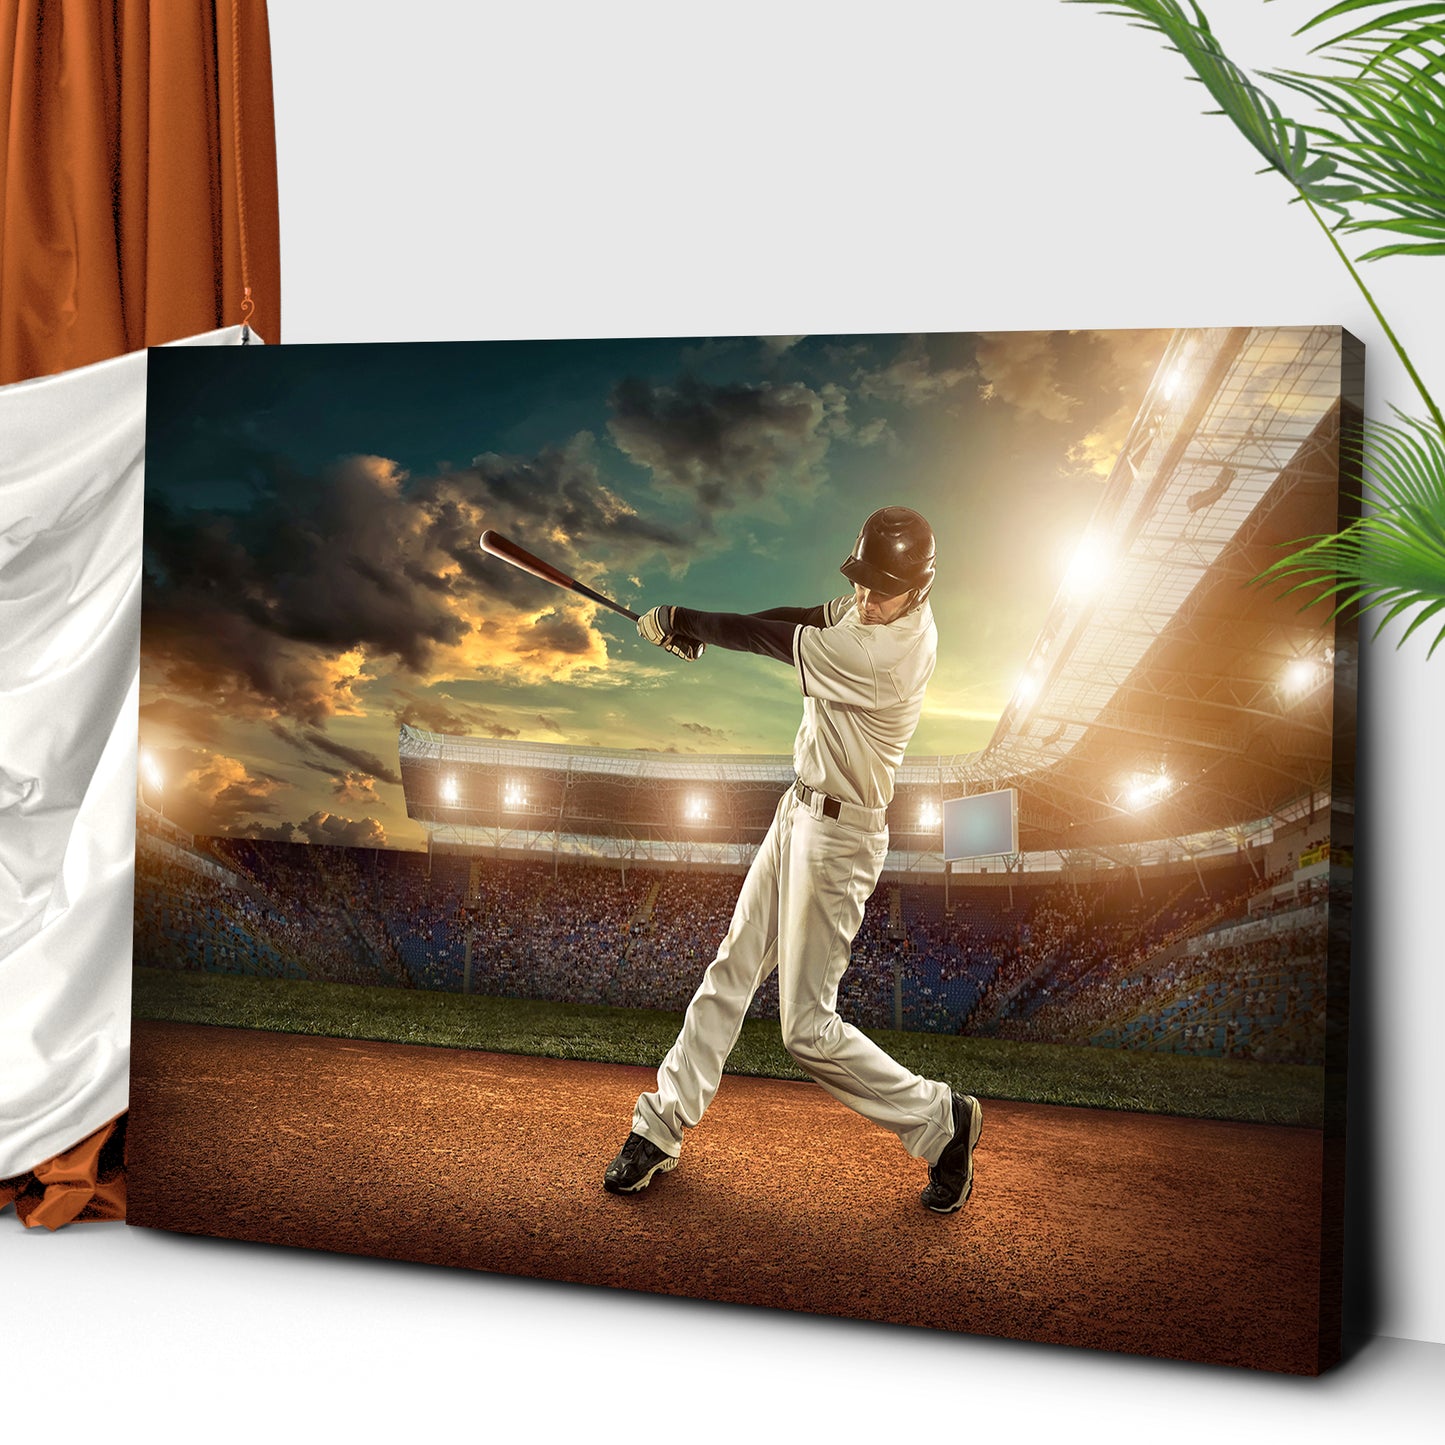 Baseball Hitter Canvas Wall Art  Style 2 - Image by Tailored Canvases